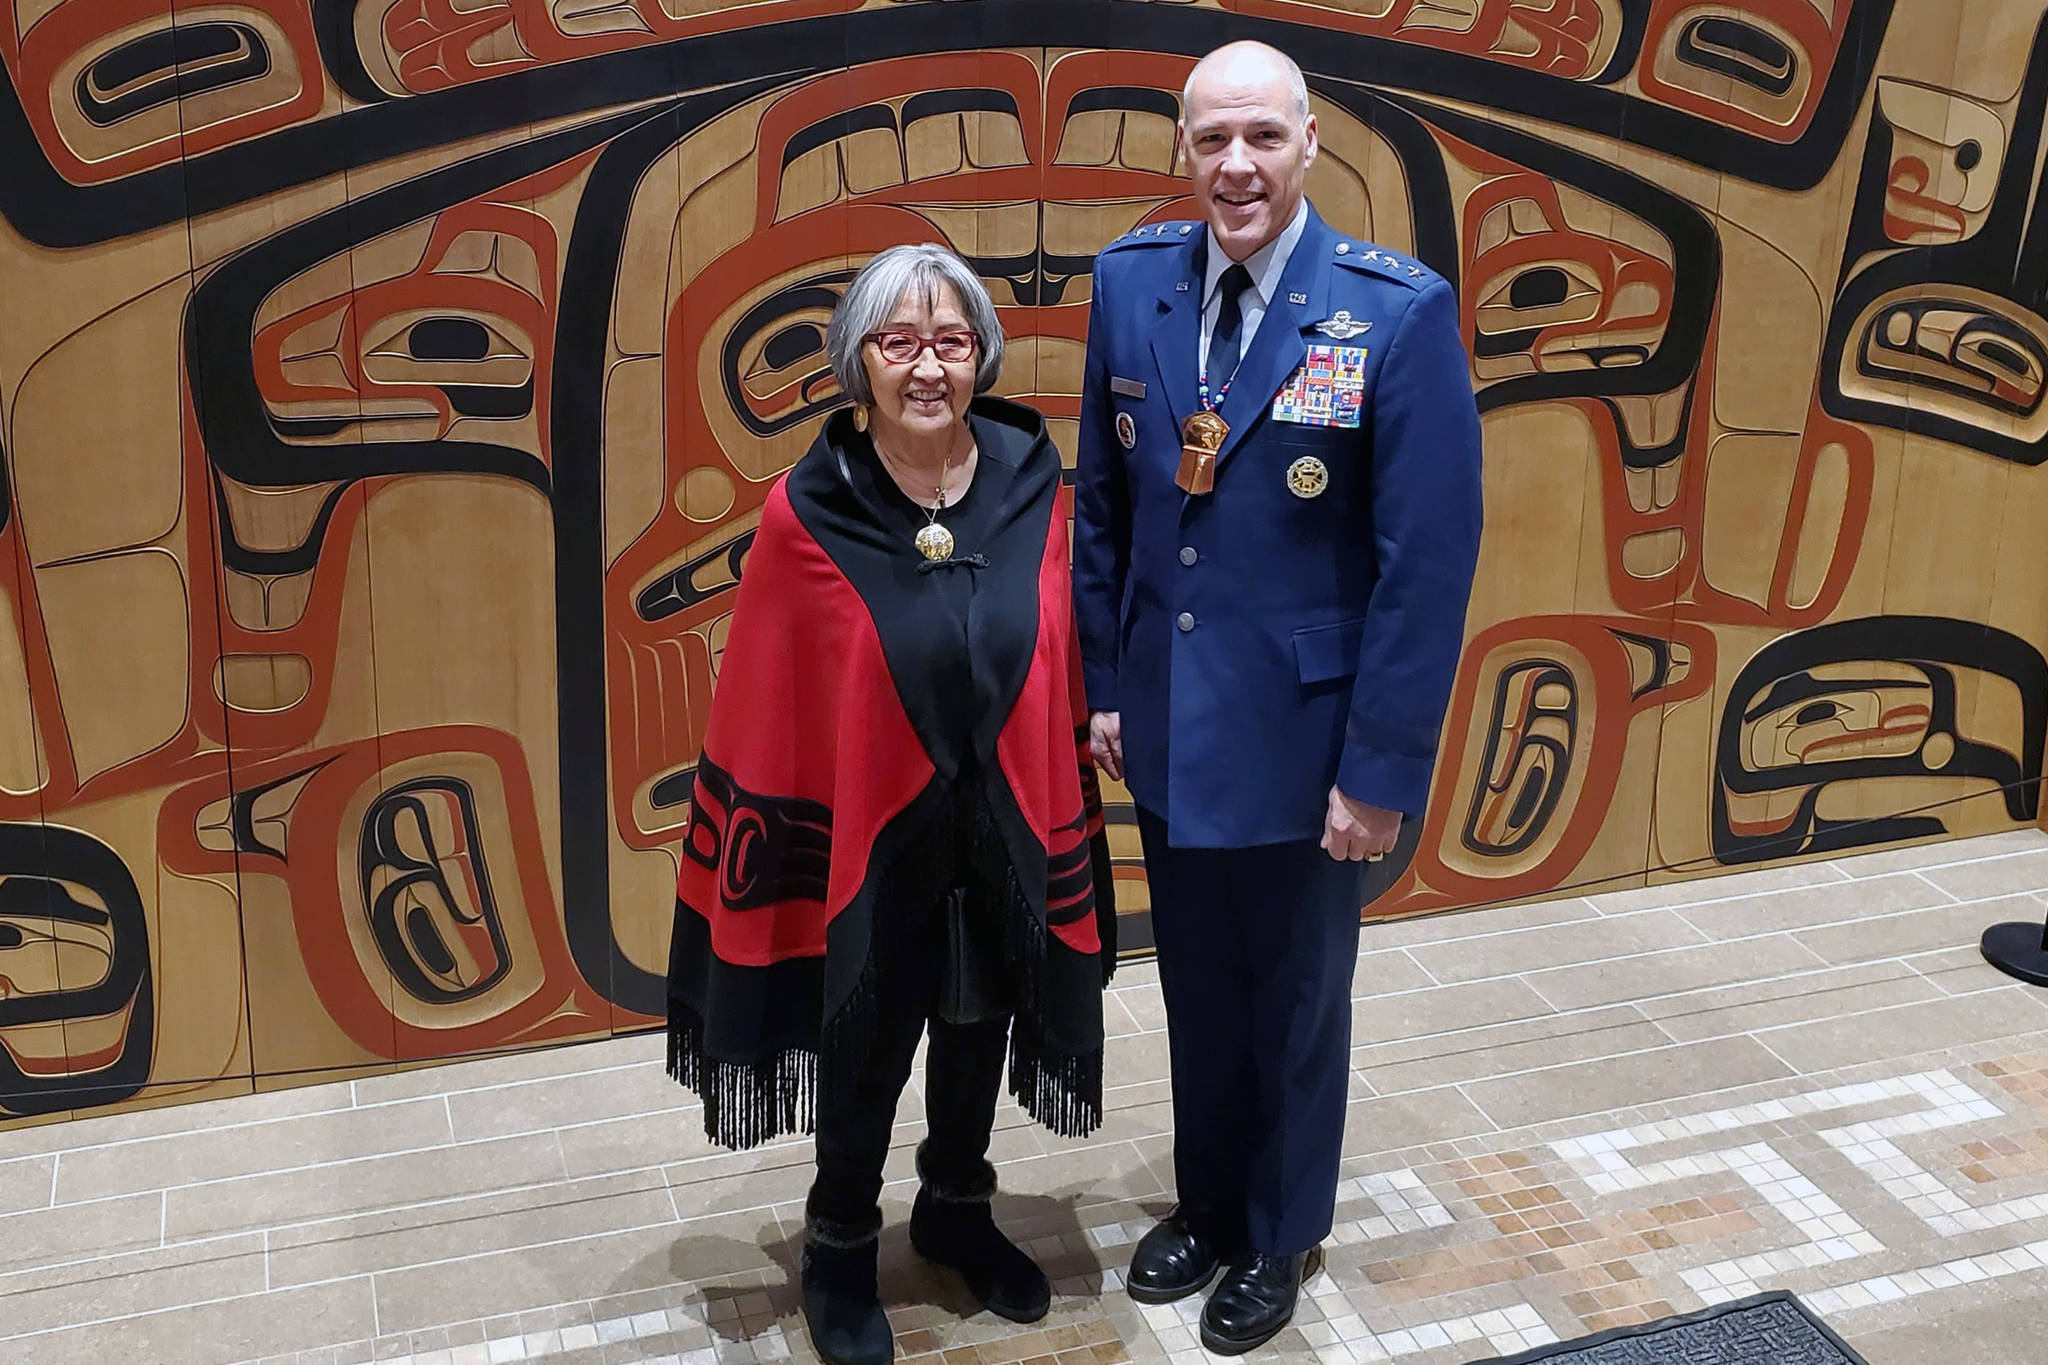 Sealaska Heritage Institute President Rosita Worl and Air Force Lt. Gen. Tom Bussiere, Commander for Alaskan Command, stand together following a day of meetings at SHI’s Walter Soboleff Building. Bussiere met with tribal leaders as well as clan leaders from three Southeast Alaska villages that were bombarded by the military in the 1800s. The meetings were the start of a process that could lead to public acknowledgments or apologies for the events. (Ben Hohenstatt | Juneau Empire)